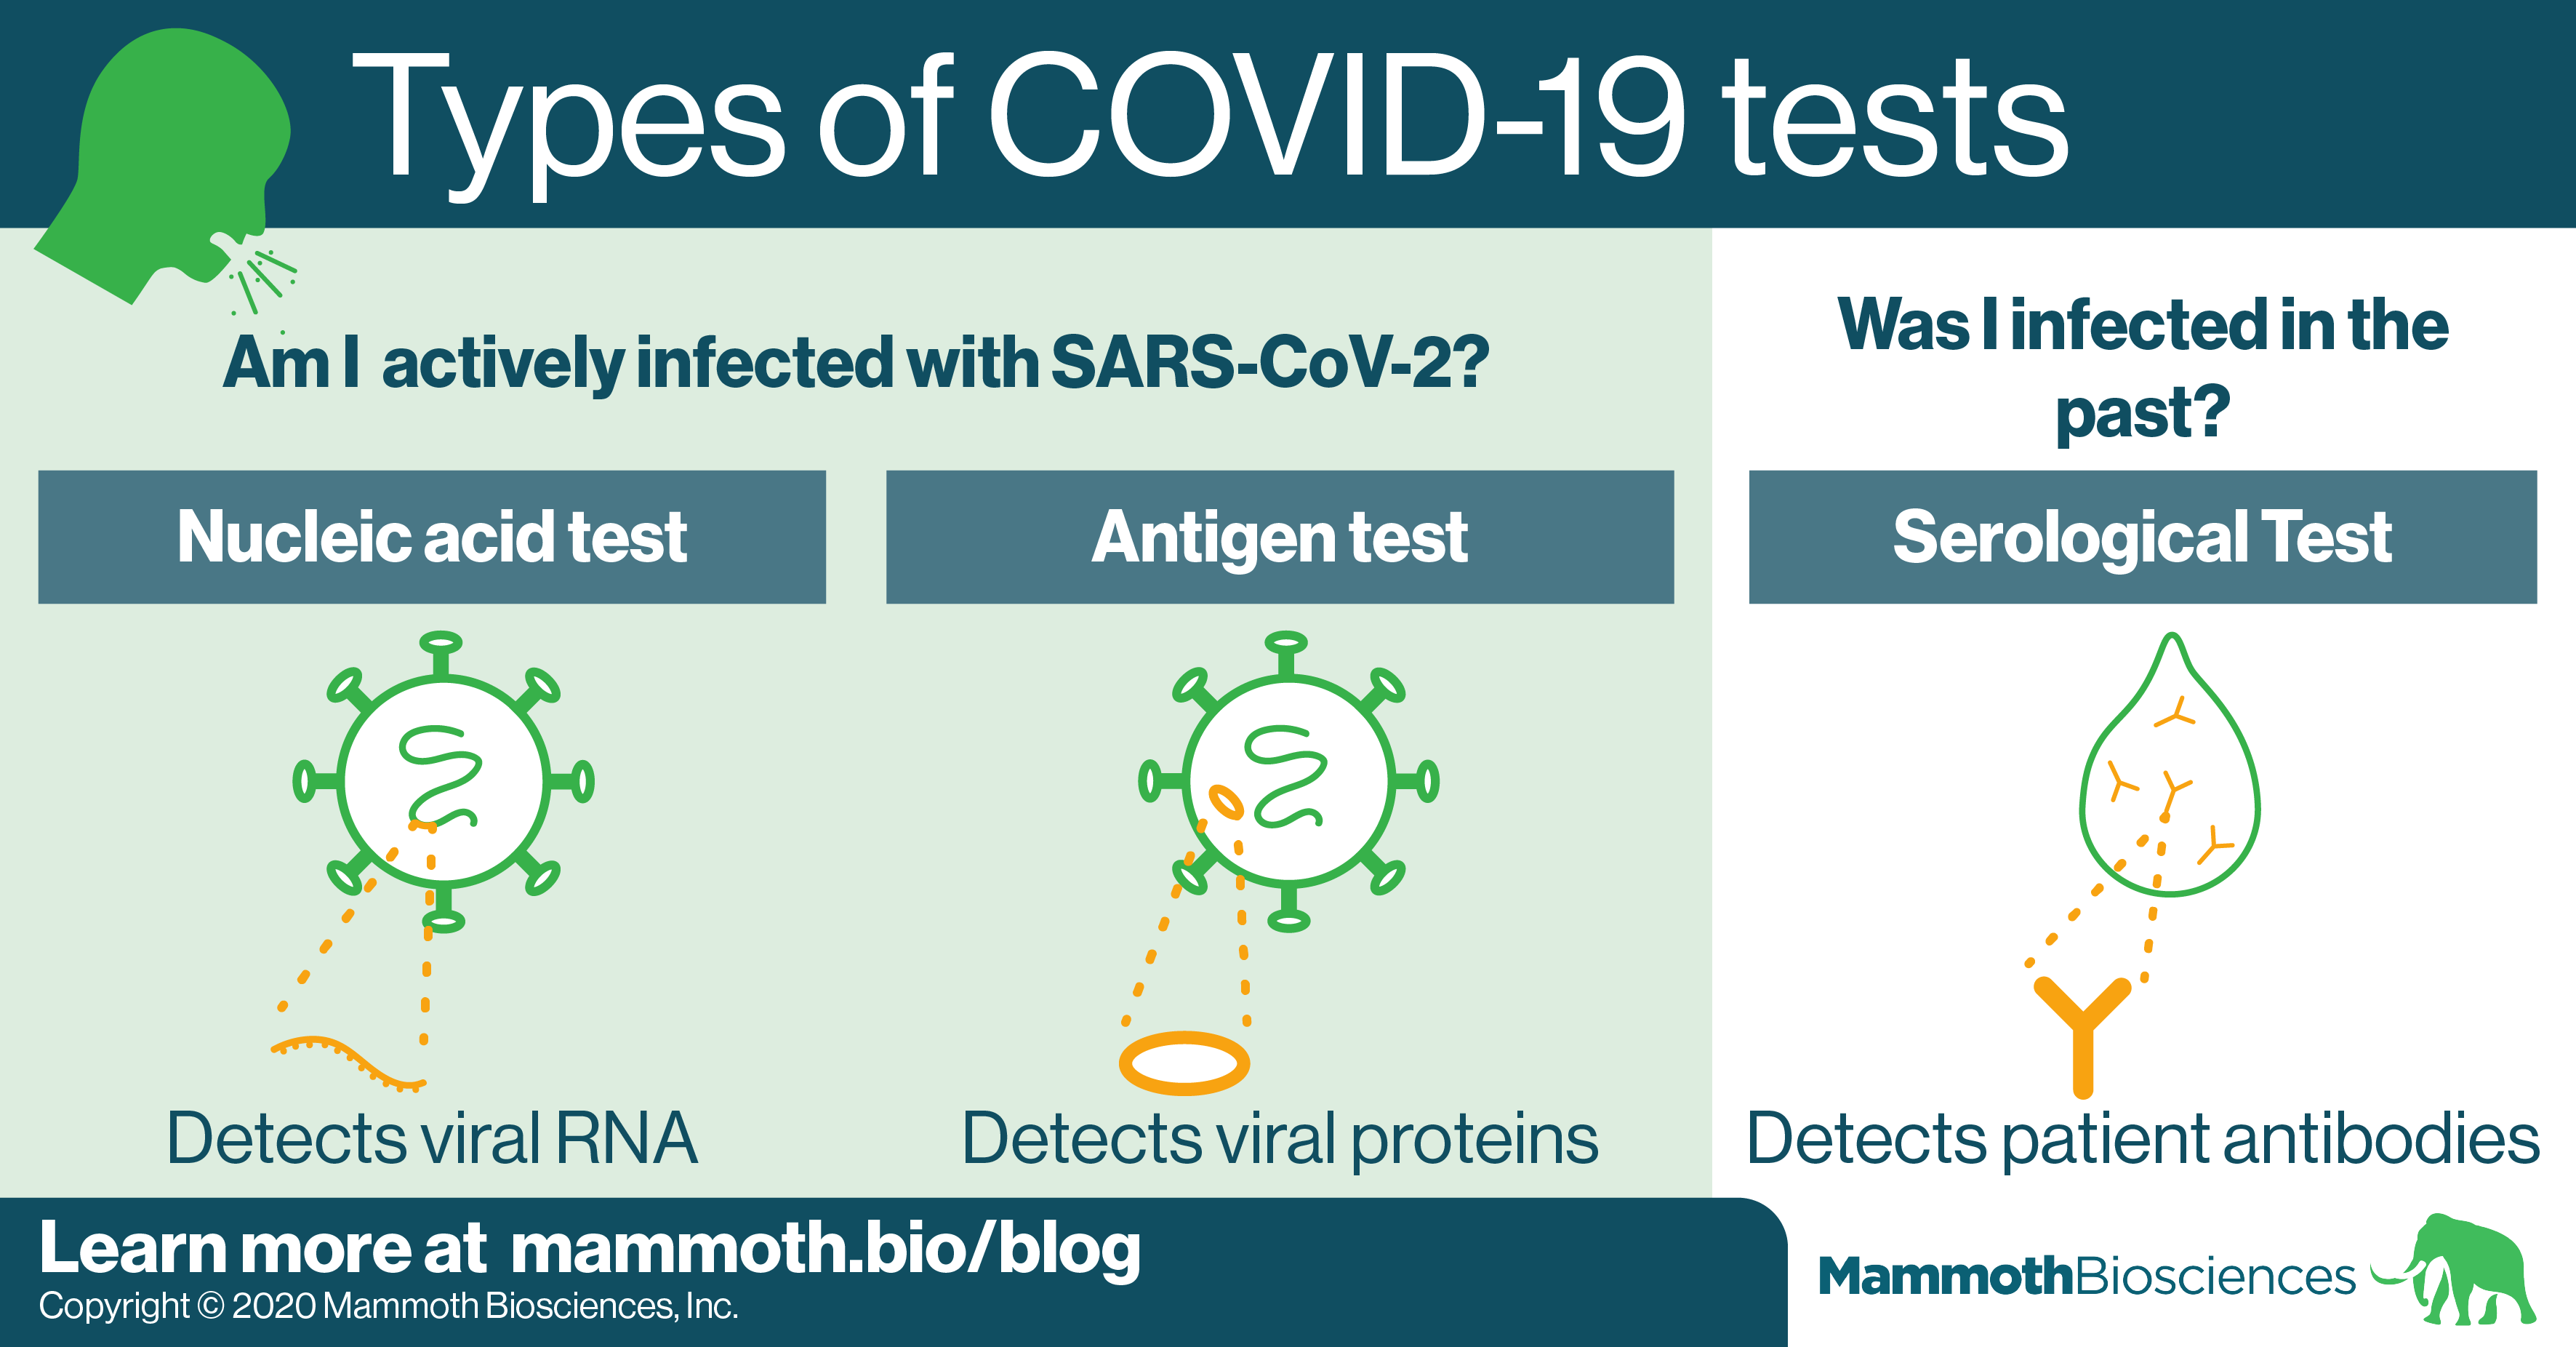 Types of COVID-19 tests - Mammoth Biosciences